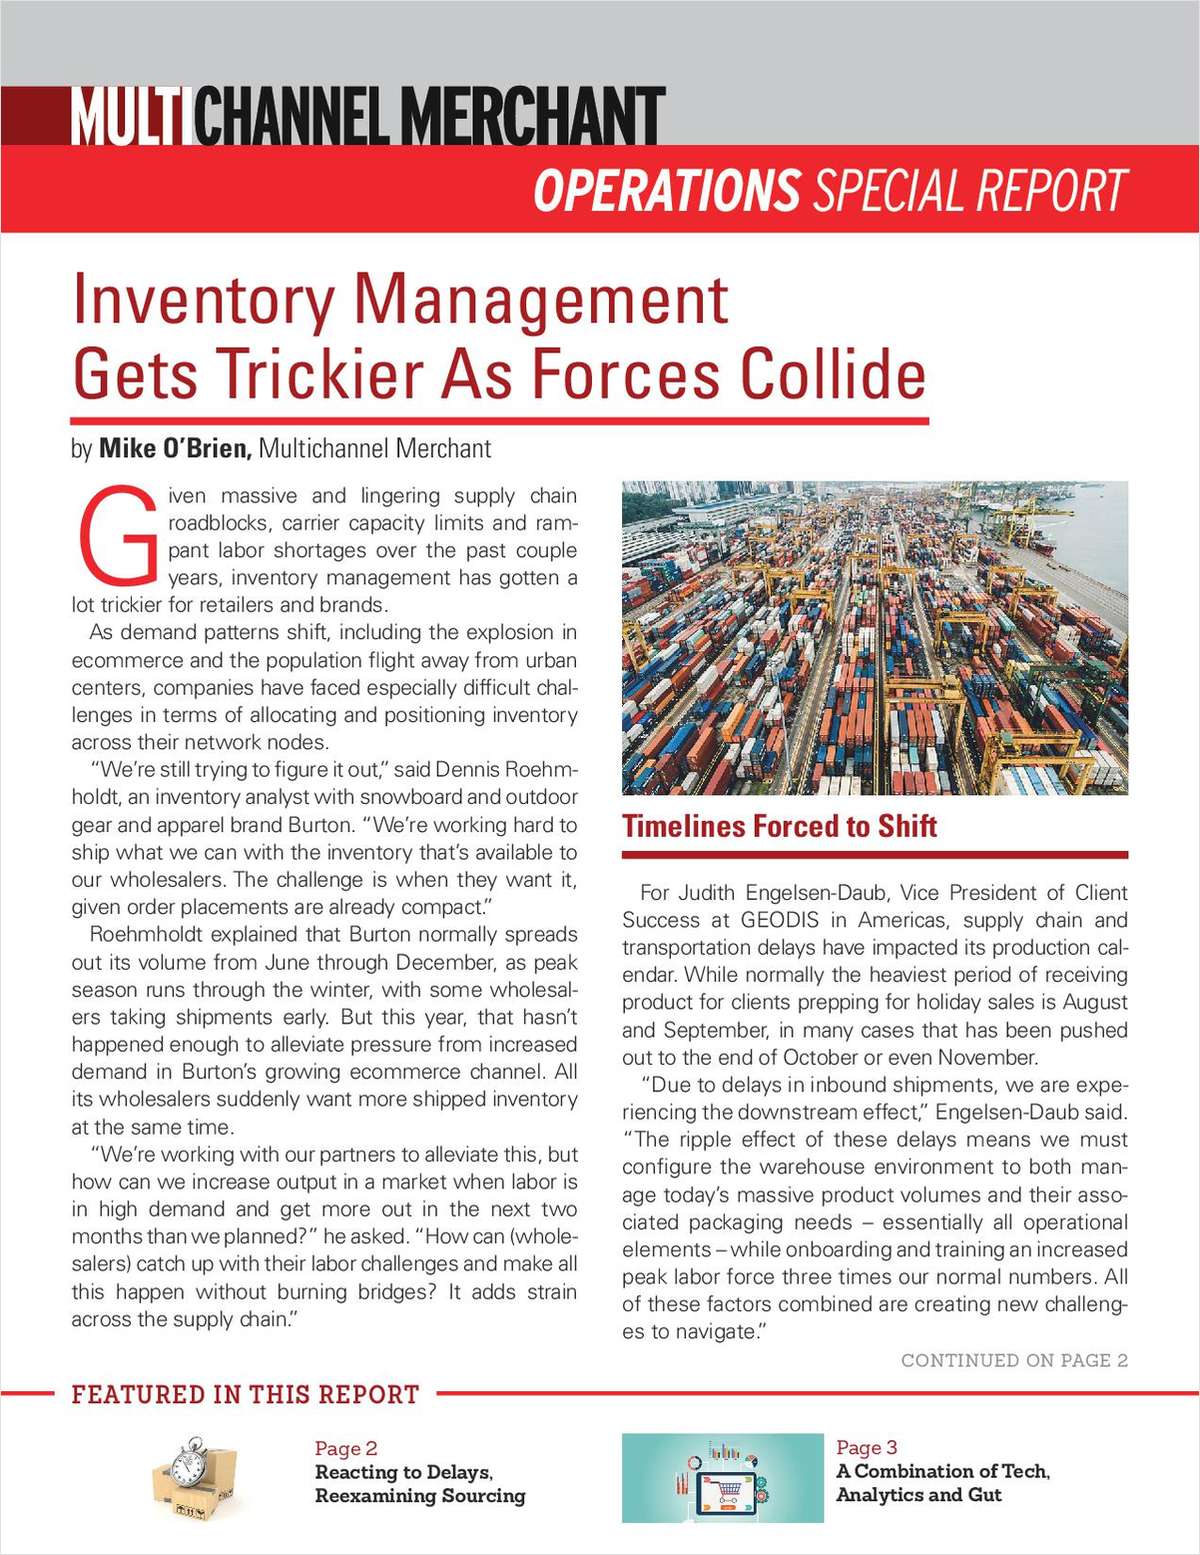 Inventory Management Gets Trickier As Forces Collide